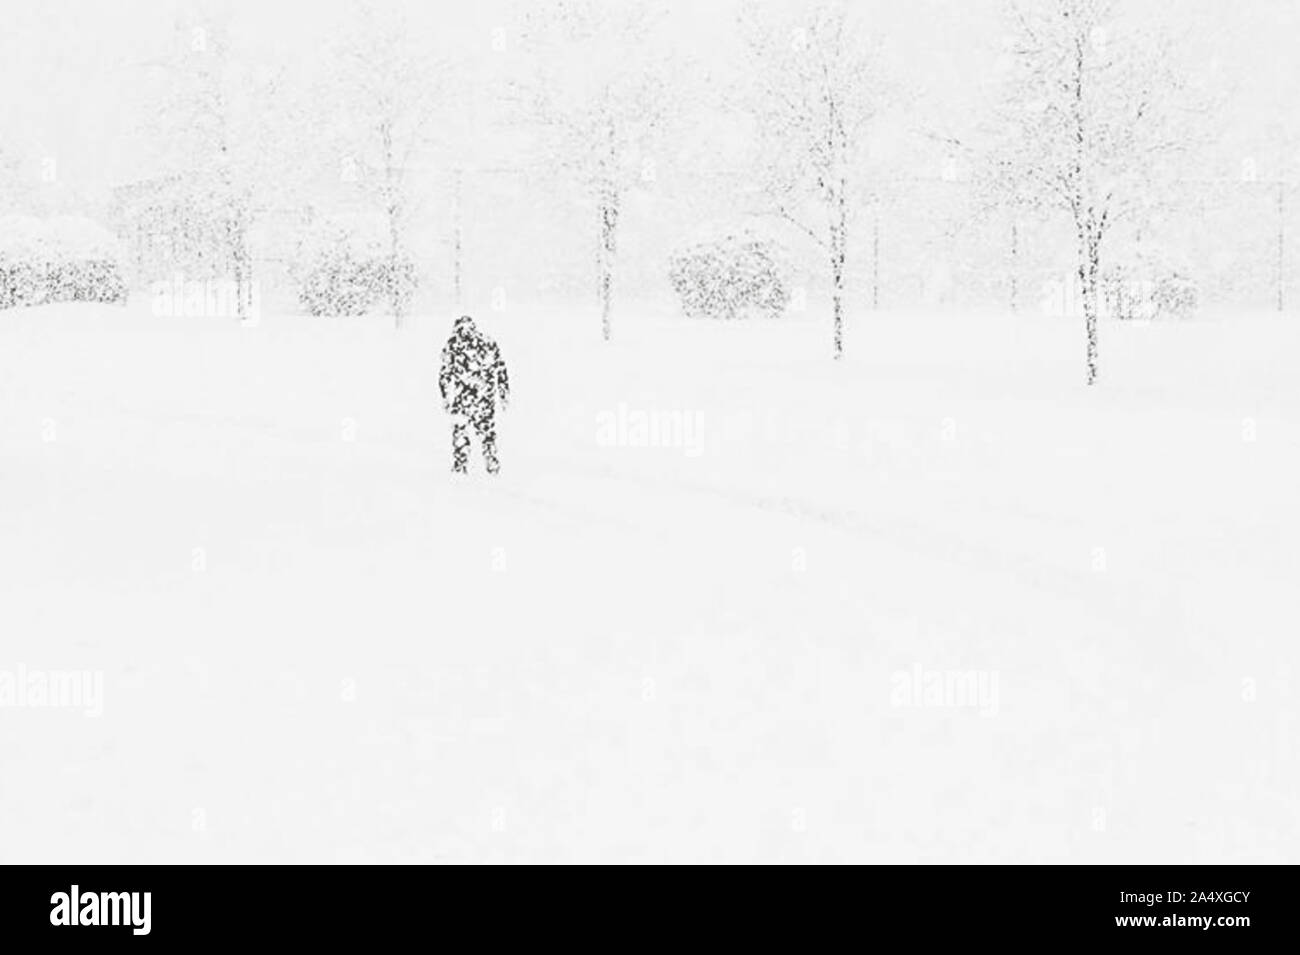 A man ventures out in a blinding blizzard on a snow day home from work. Stock Photo